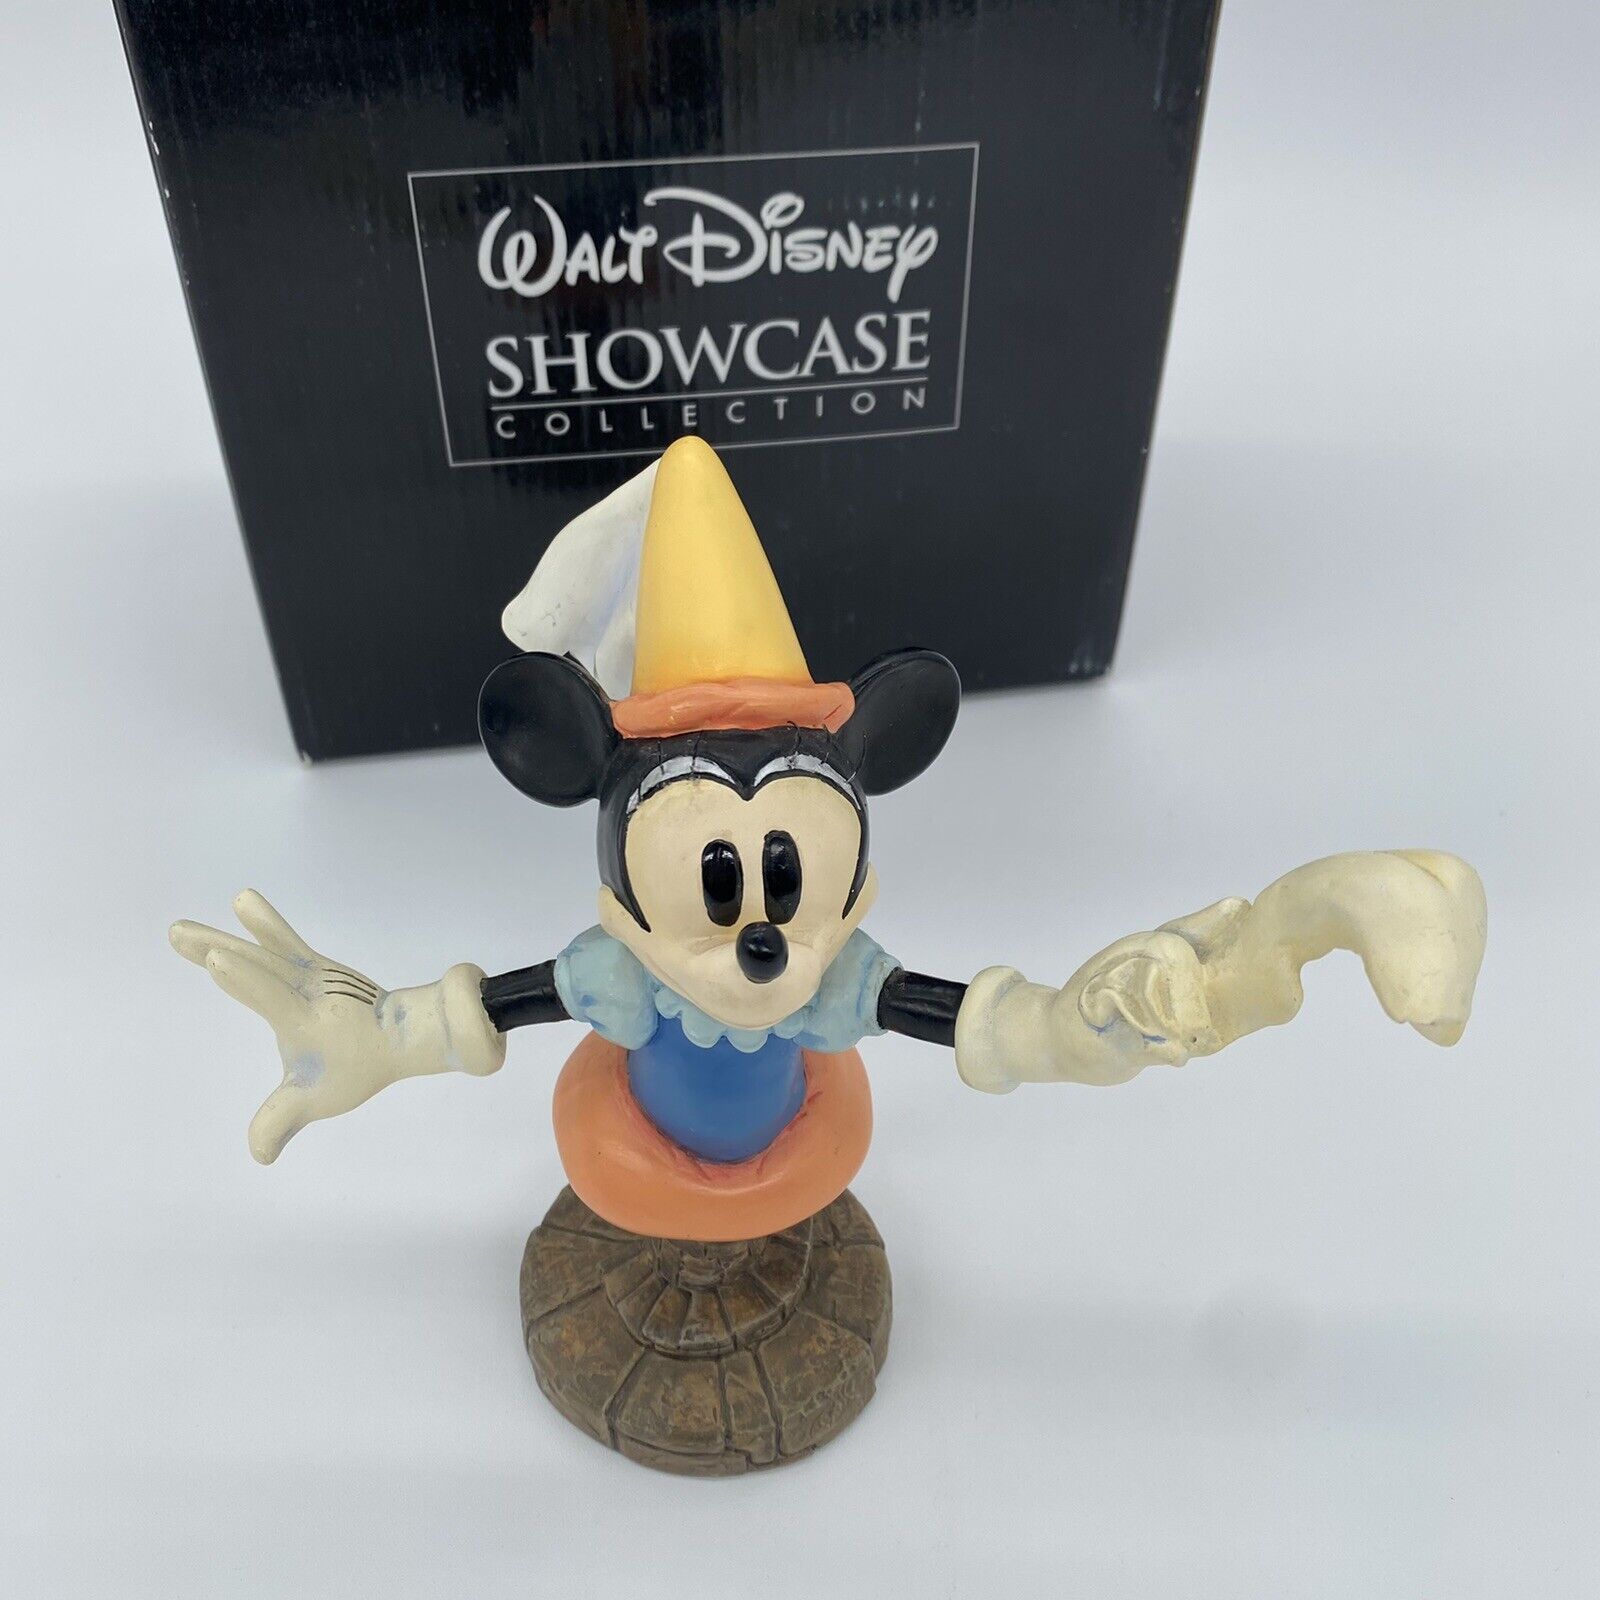 New Disney Showcase GRAND JESTER MINNIE MOUSE BUST Limited Edition 315/3000